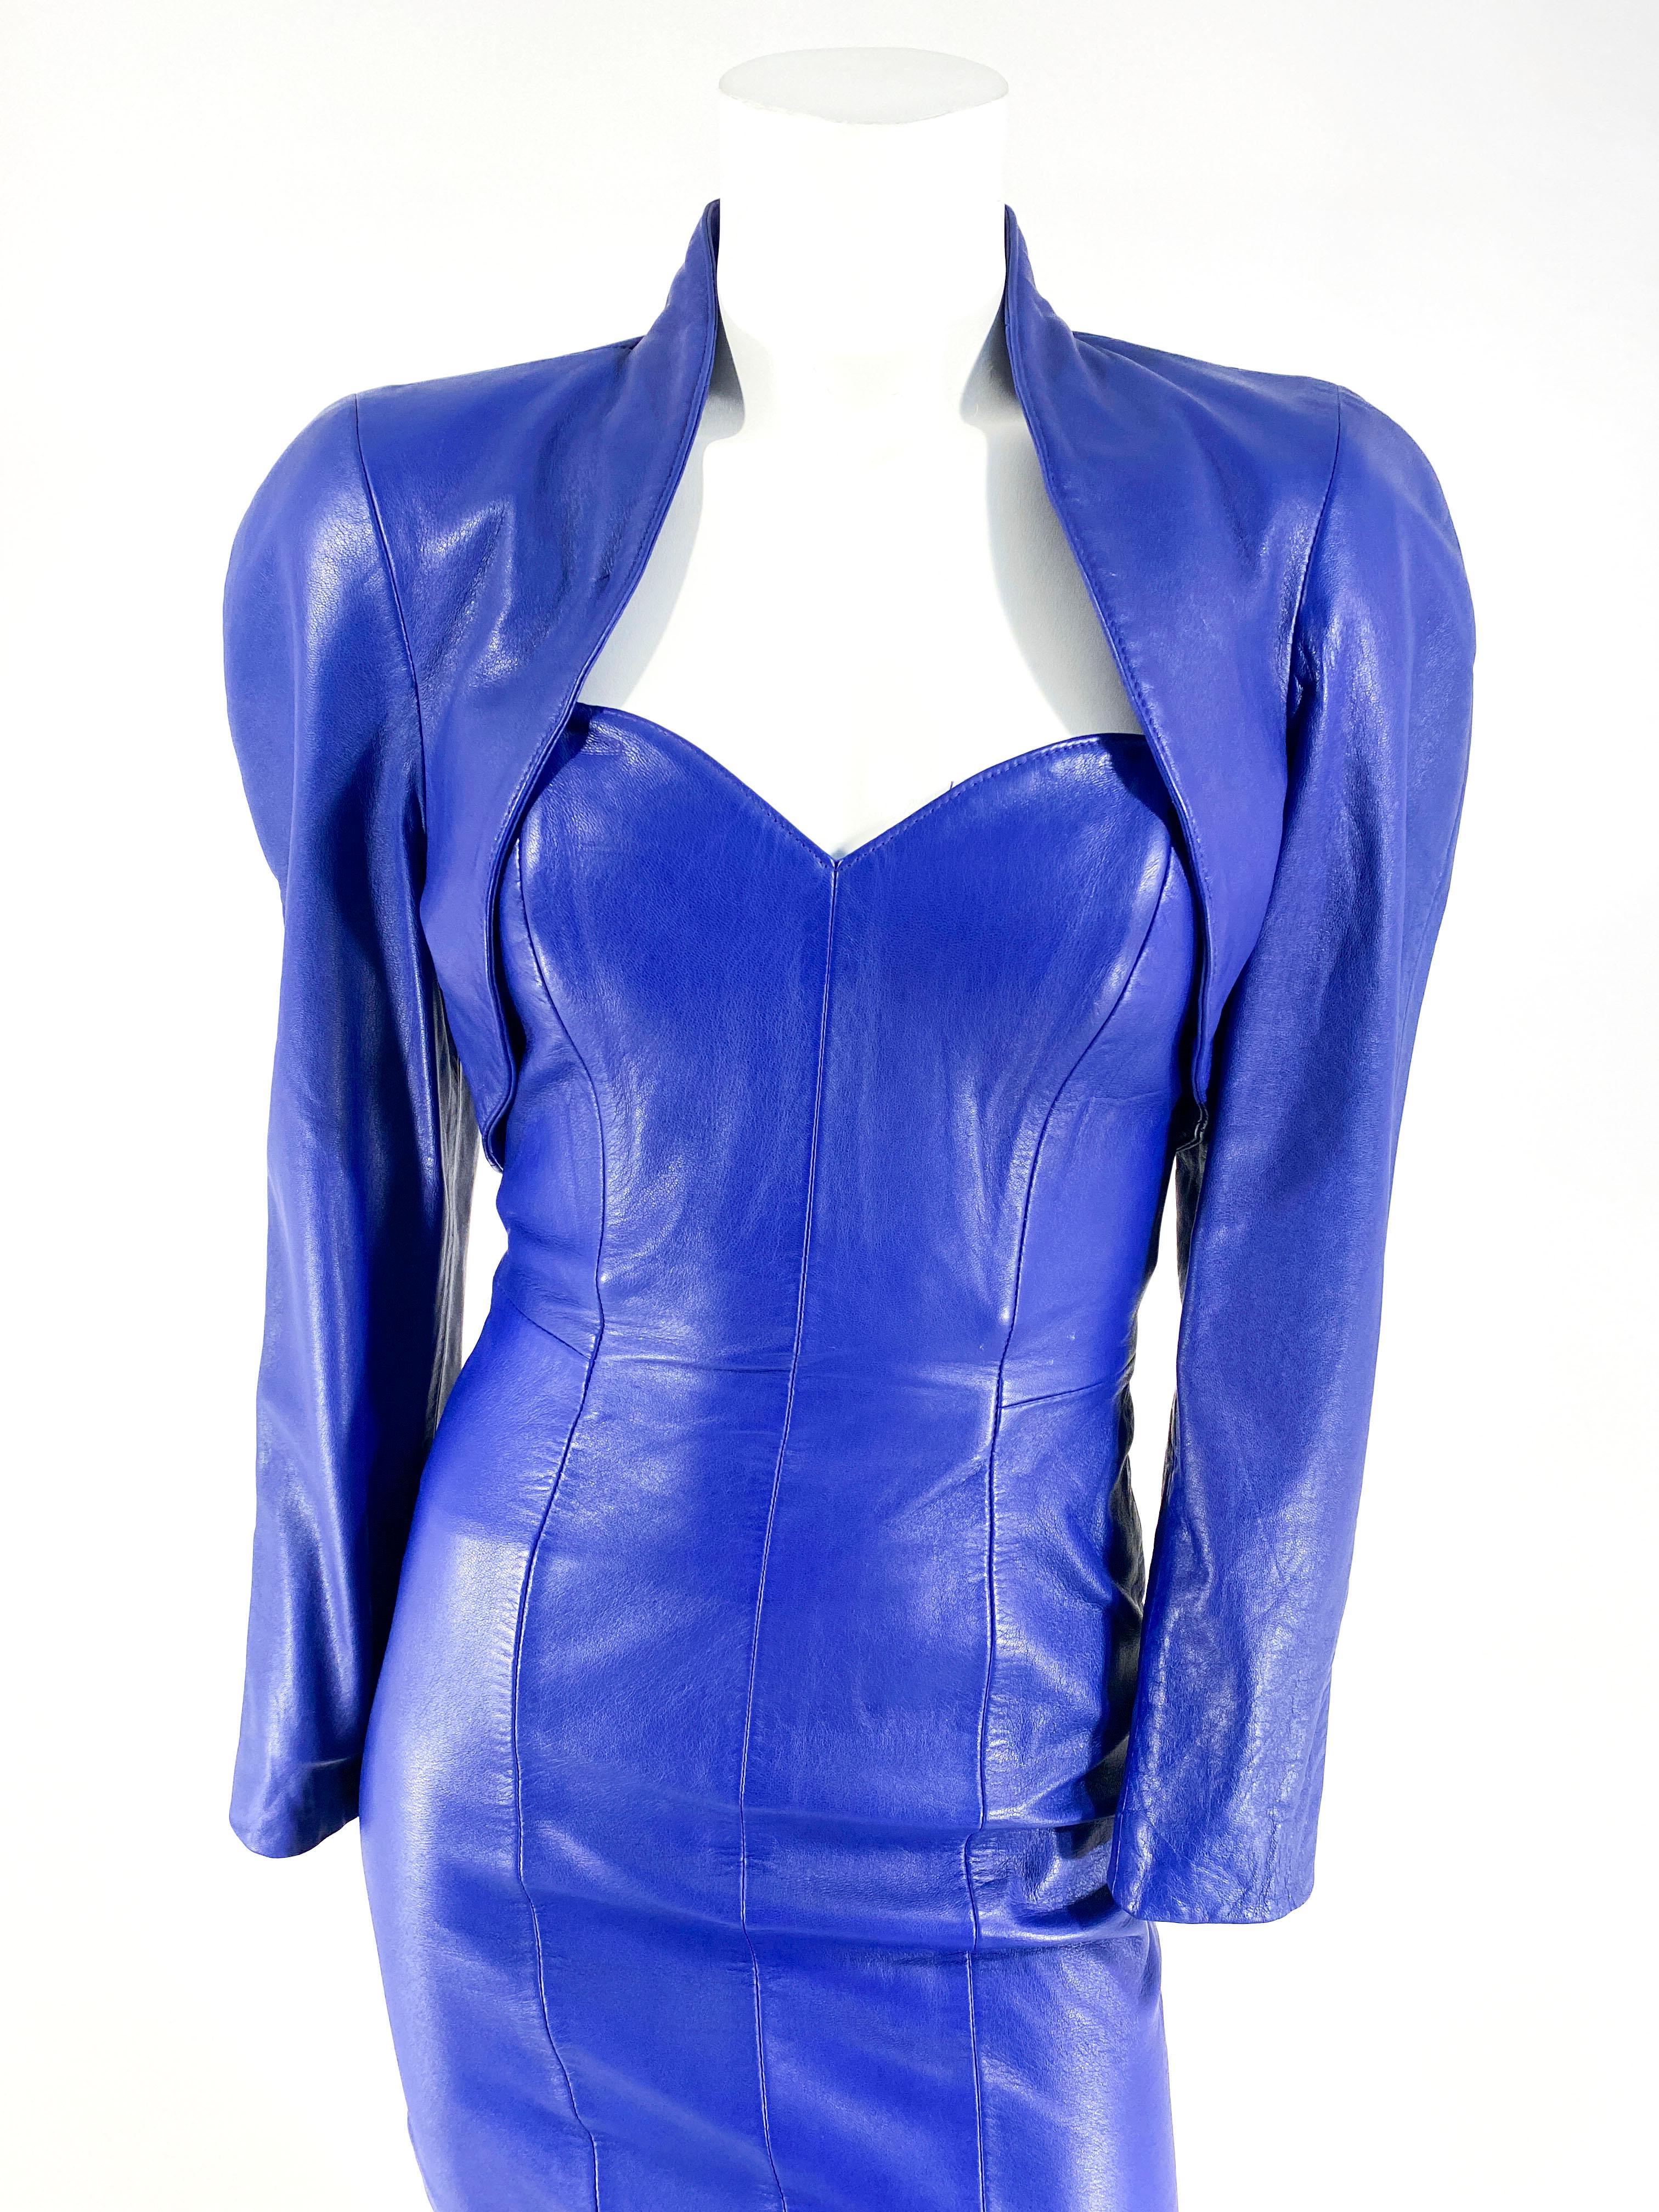 1980s North Beach Leather Eggplant Purple strapless leather dress with a zip back closure. The matching bolero jacket has full-length sleeves, full-padded shoulders, full lining, and no closure. Petite size US 4/5